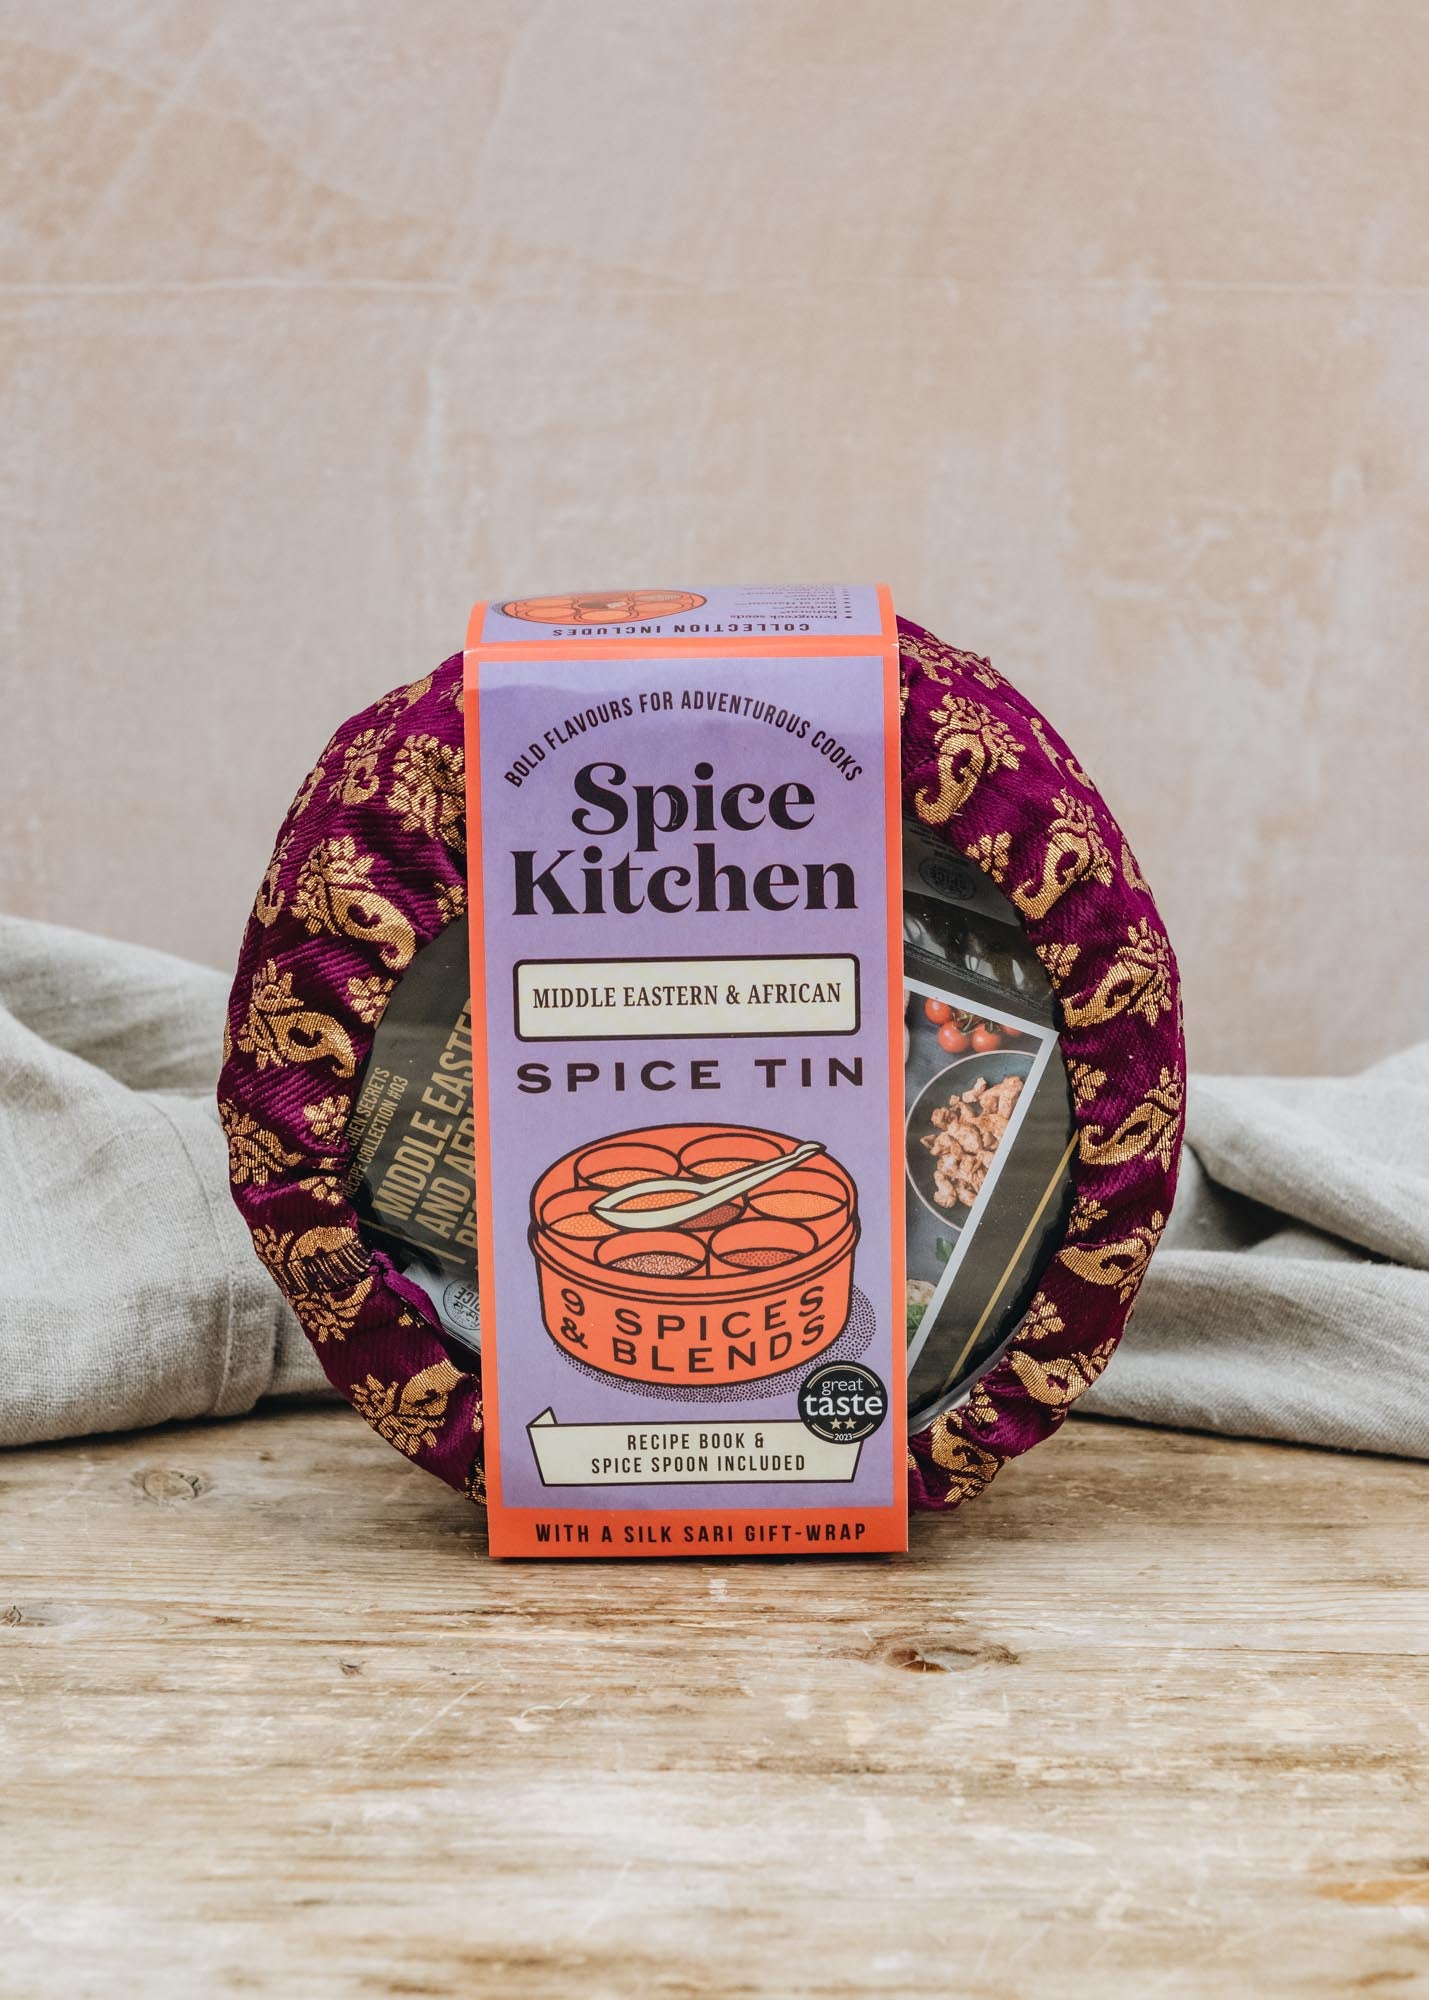 Spice Kitchen Middle Eastern and African Spice Tin with Silk Wrap